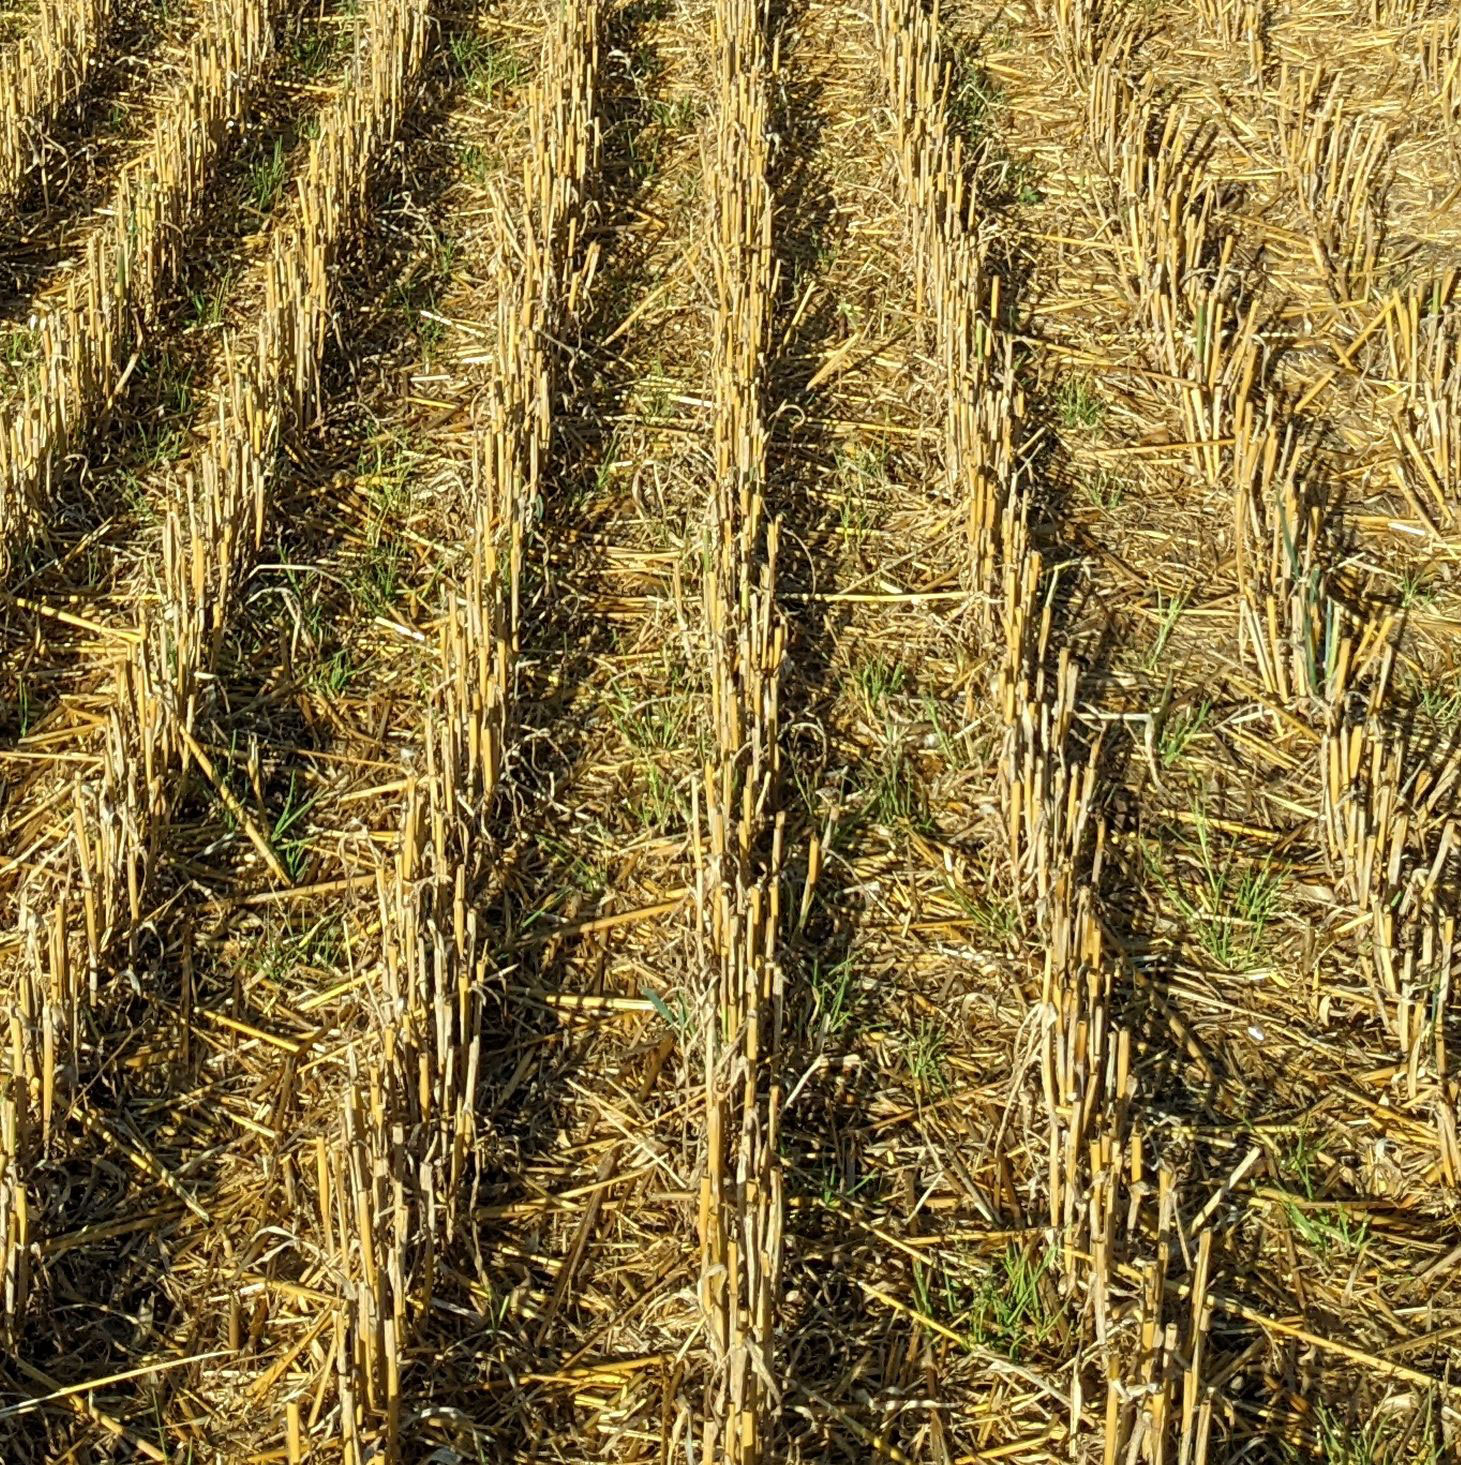 Oat stubble with 25 cm row width (B) on 28th August 2022